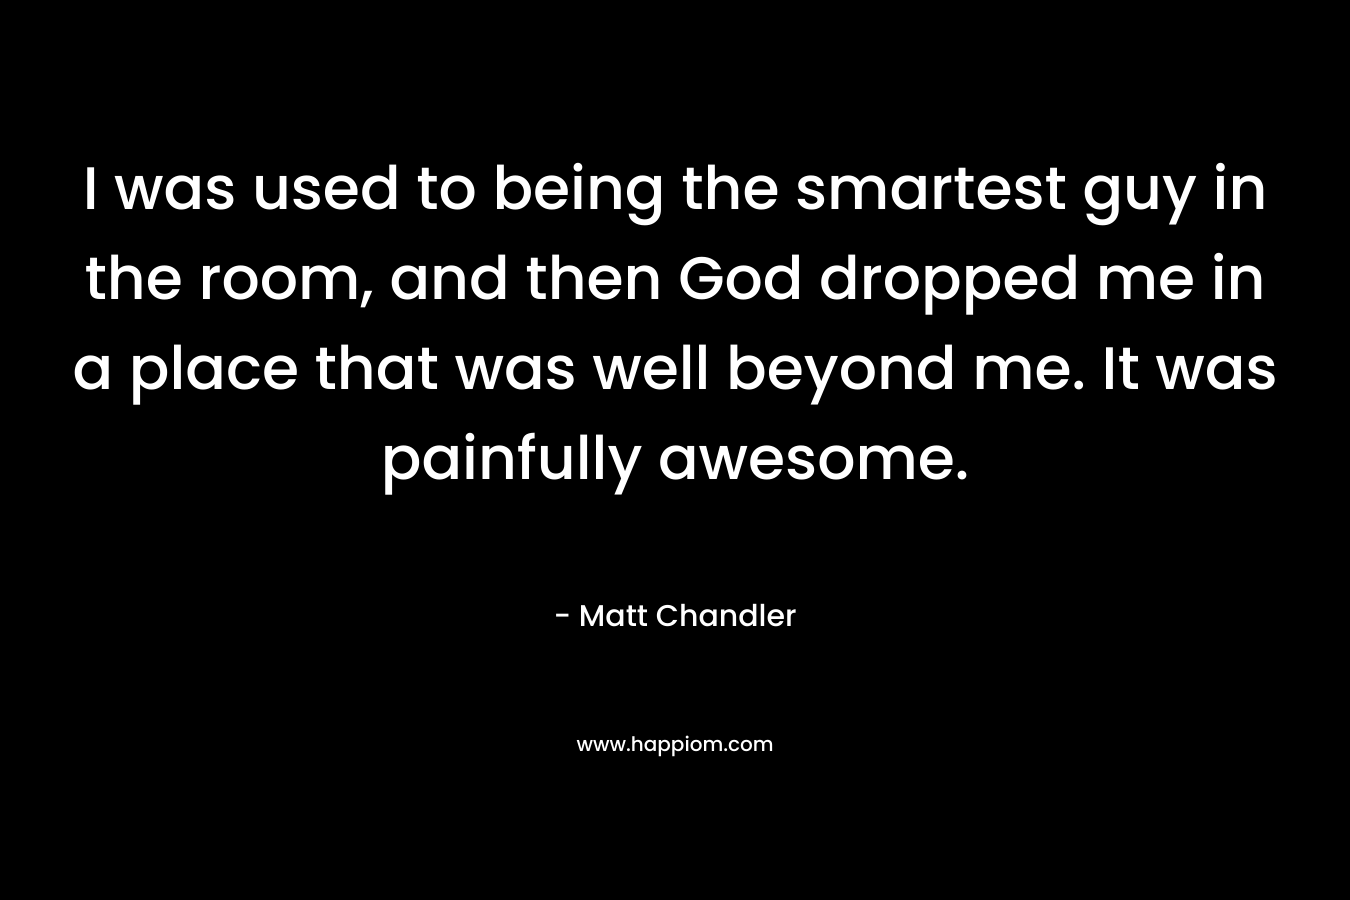 I was used to being the smartest guy in the room, and then God dropped me in a place that was well beyond me. It was painfully awesome.